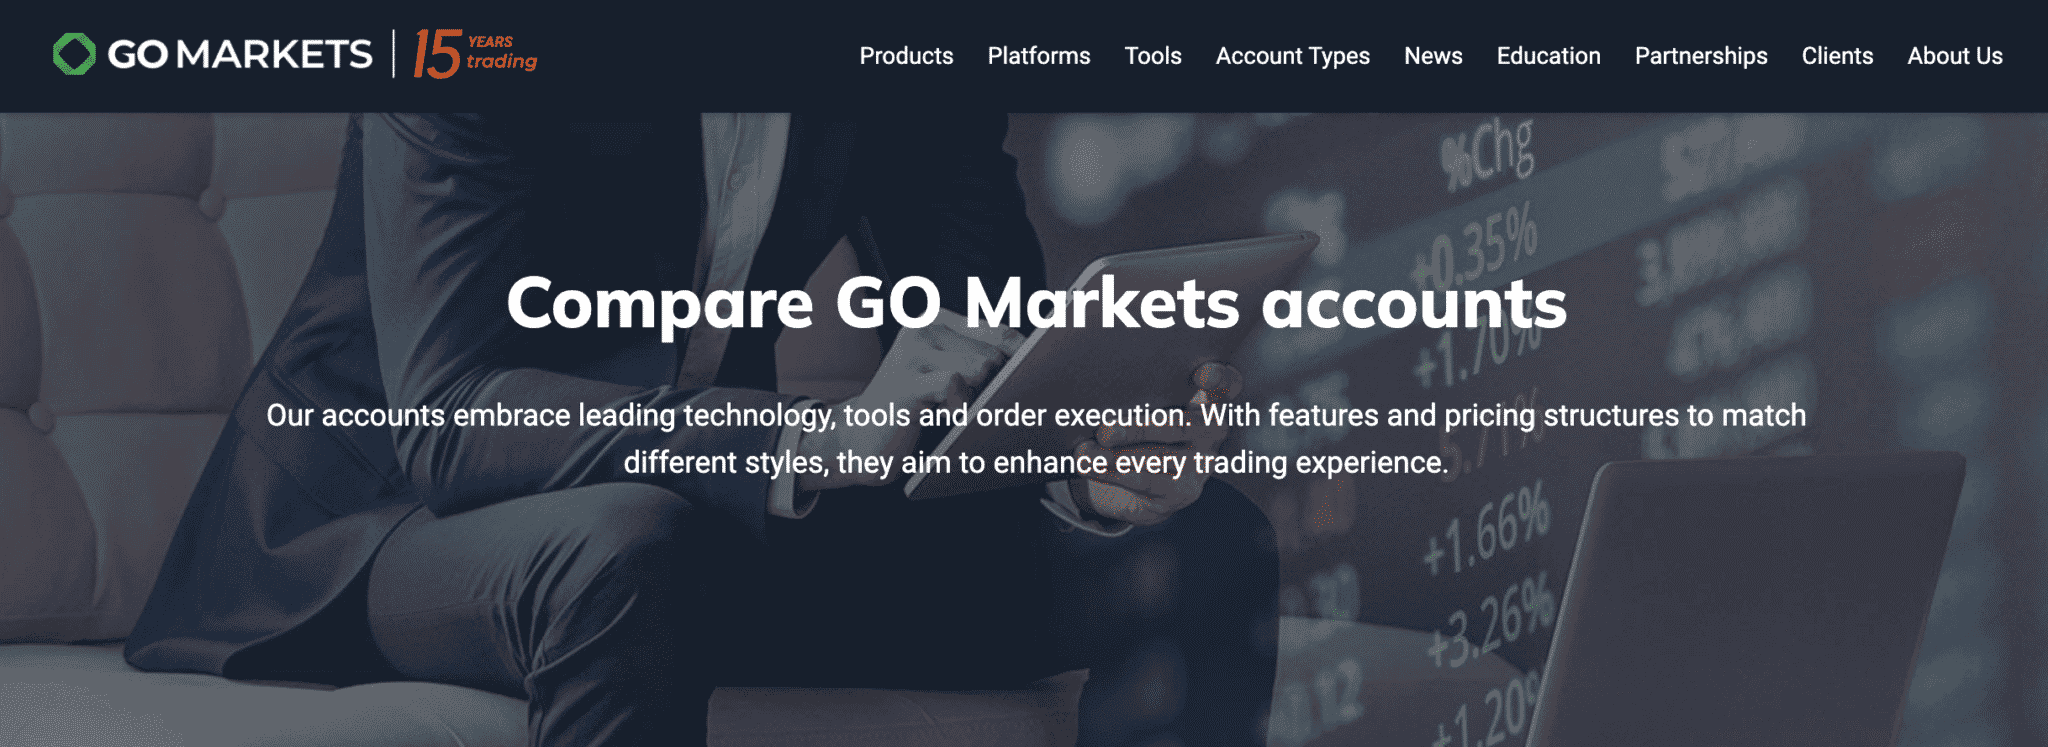 GO Markets Account Types and Features Namibia